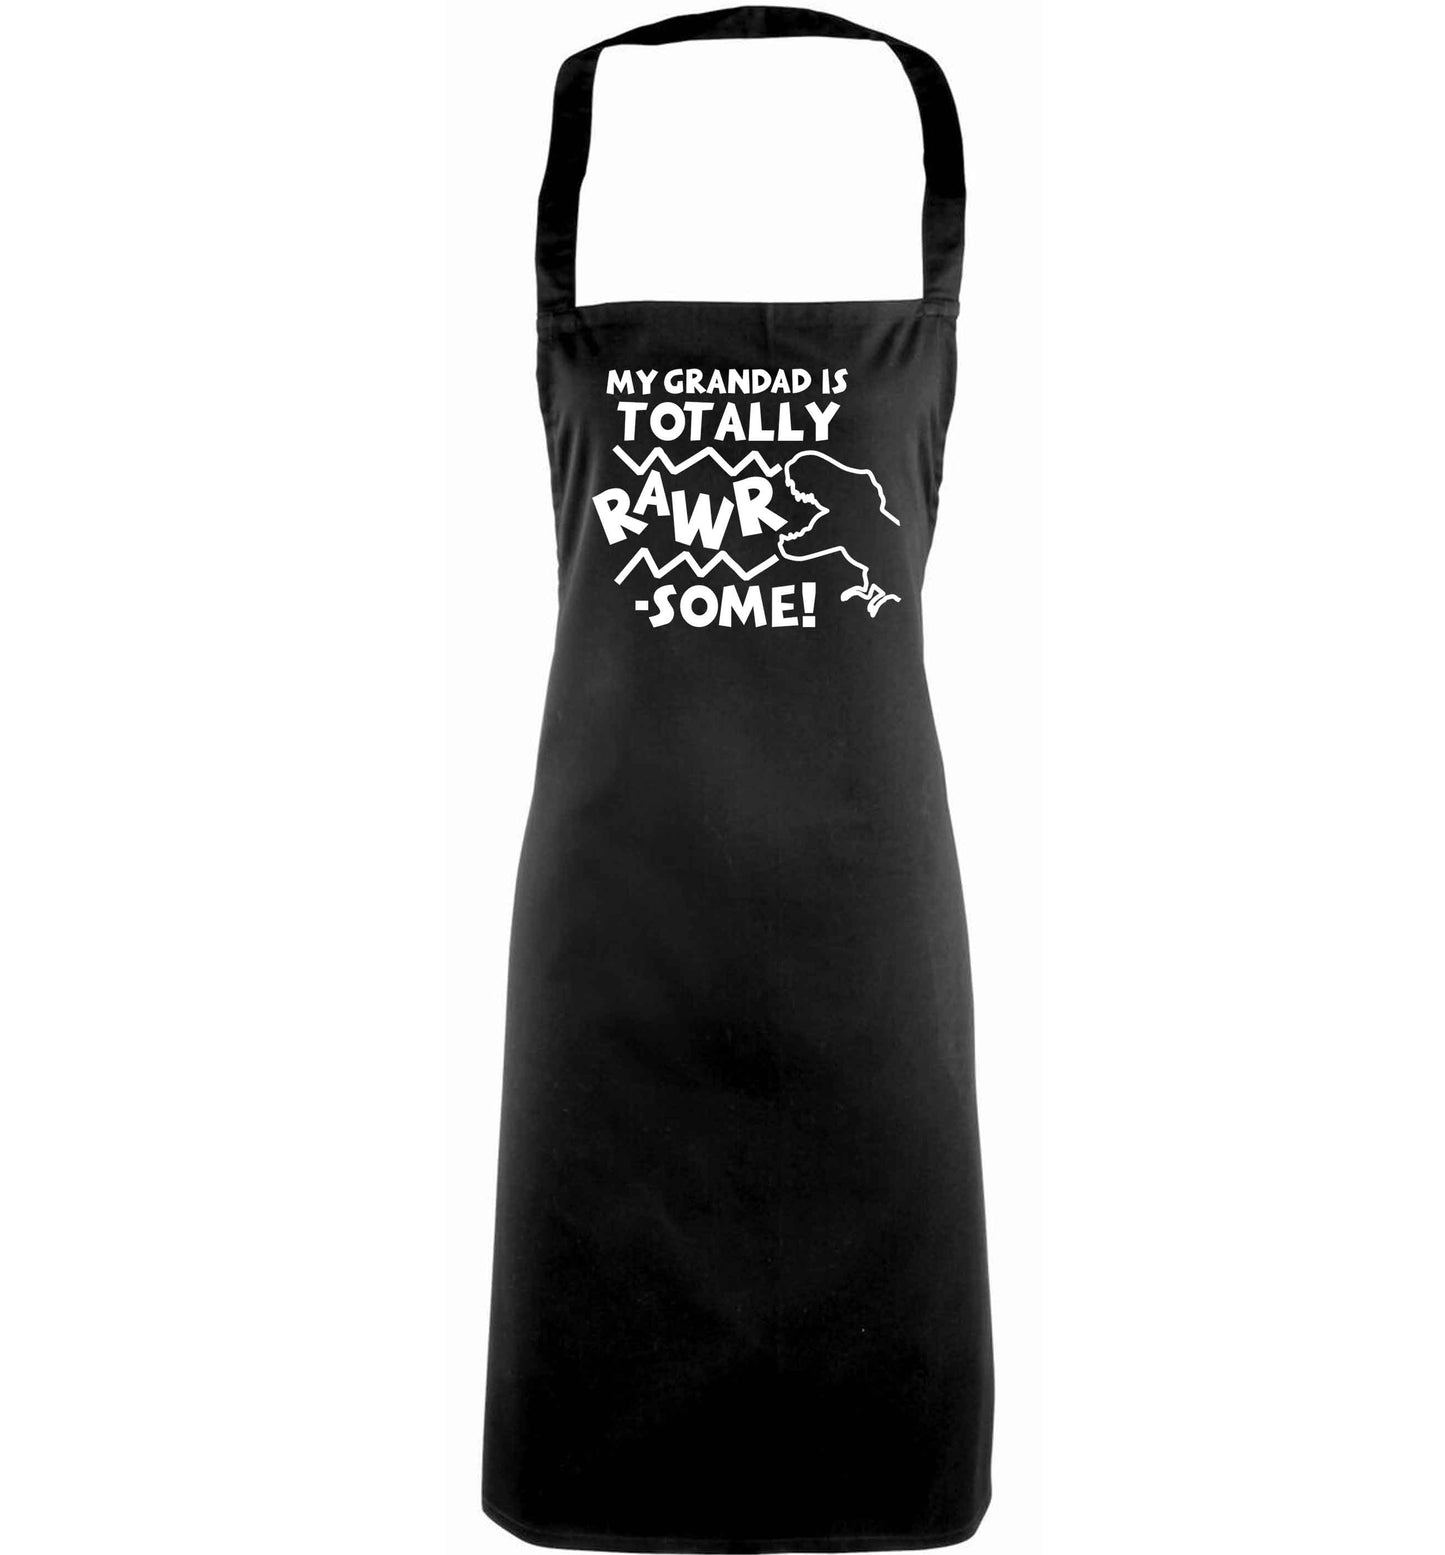 My grandad is totally rawrsome adults black apron